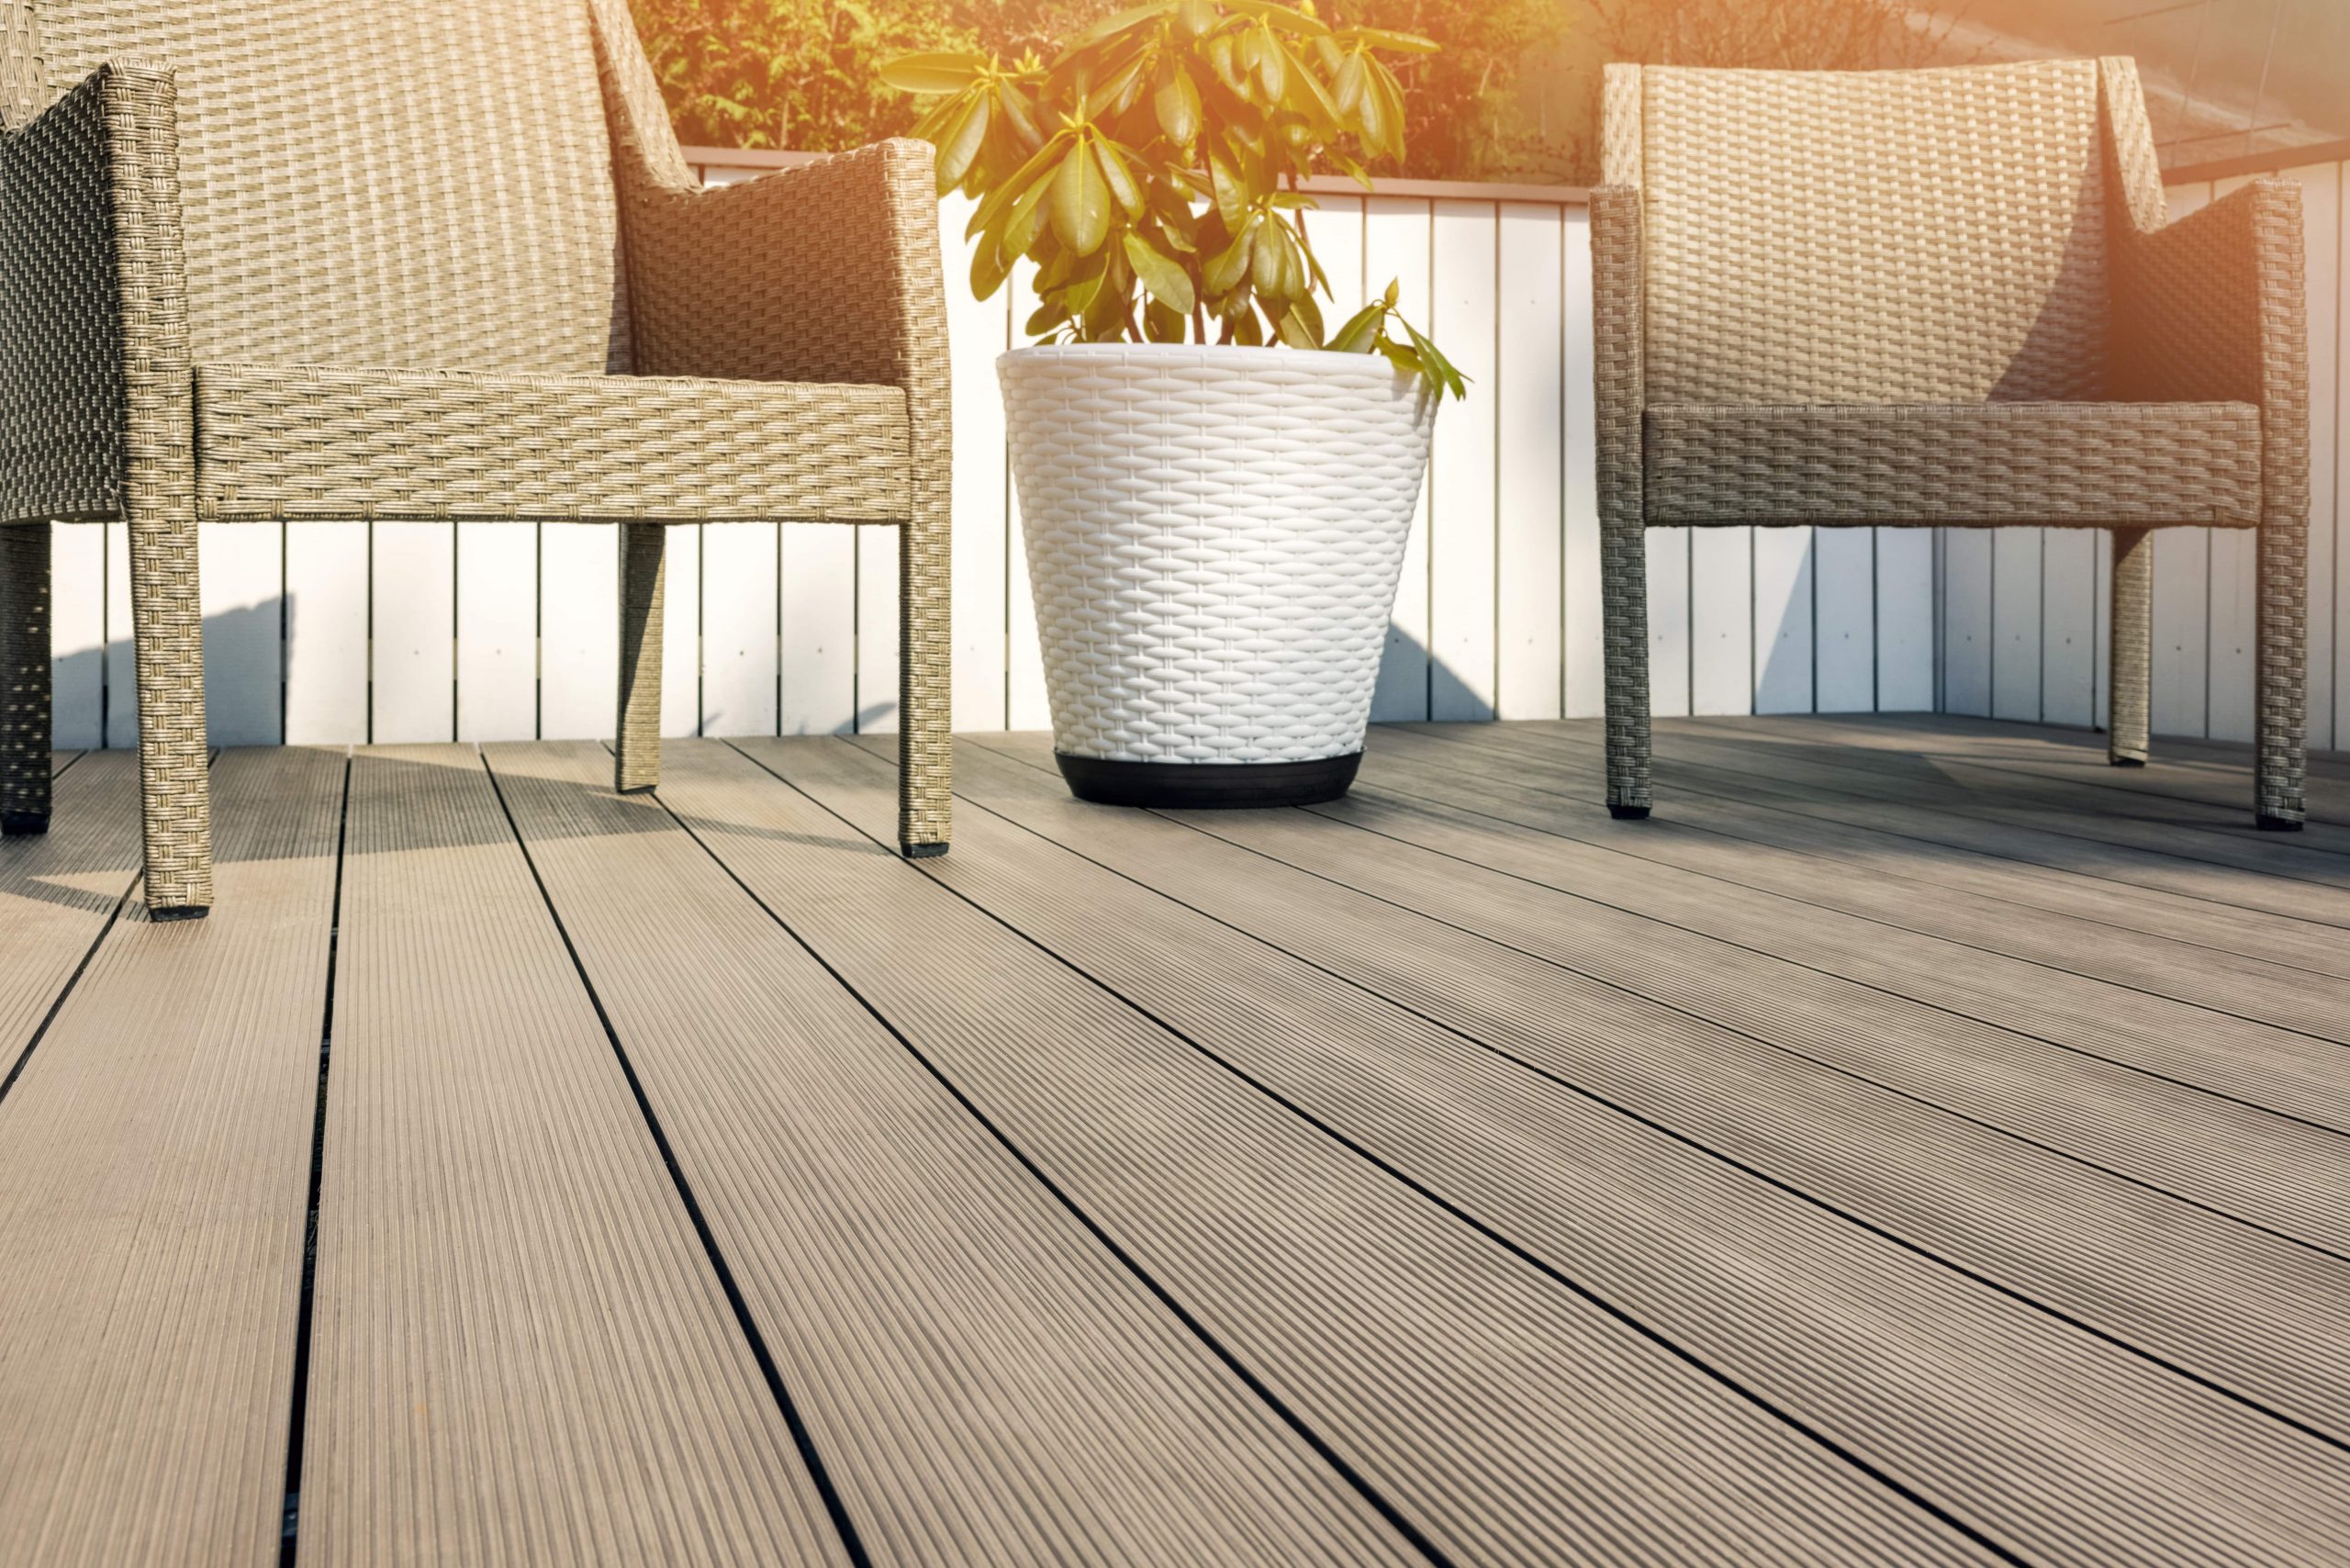 Furnished outdoor terrace with composite decking boards